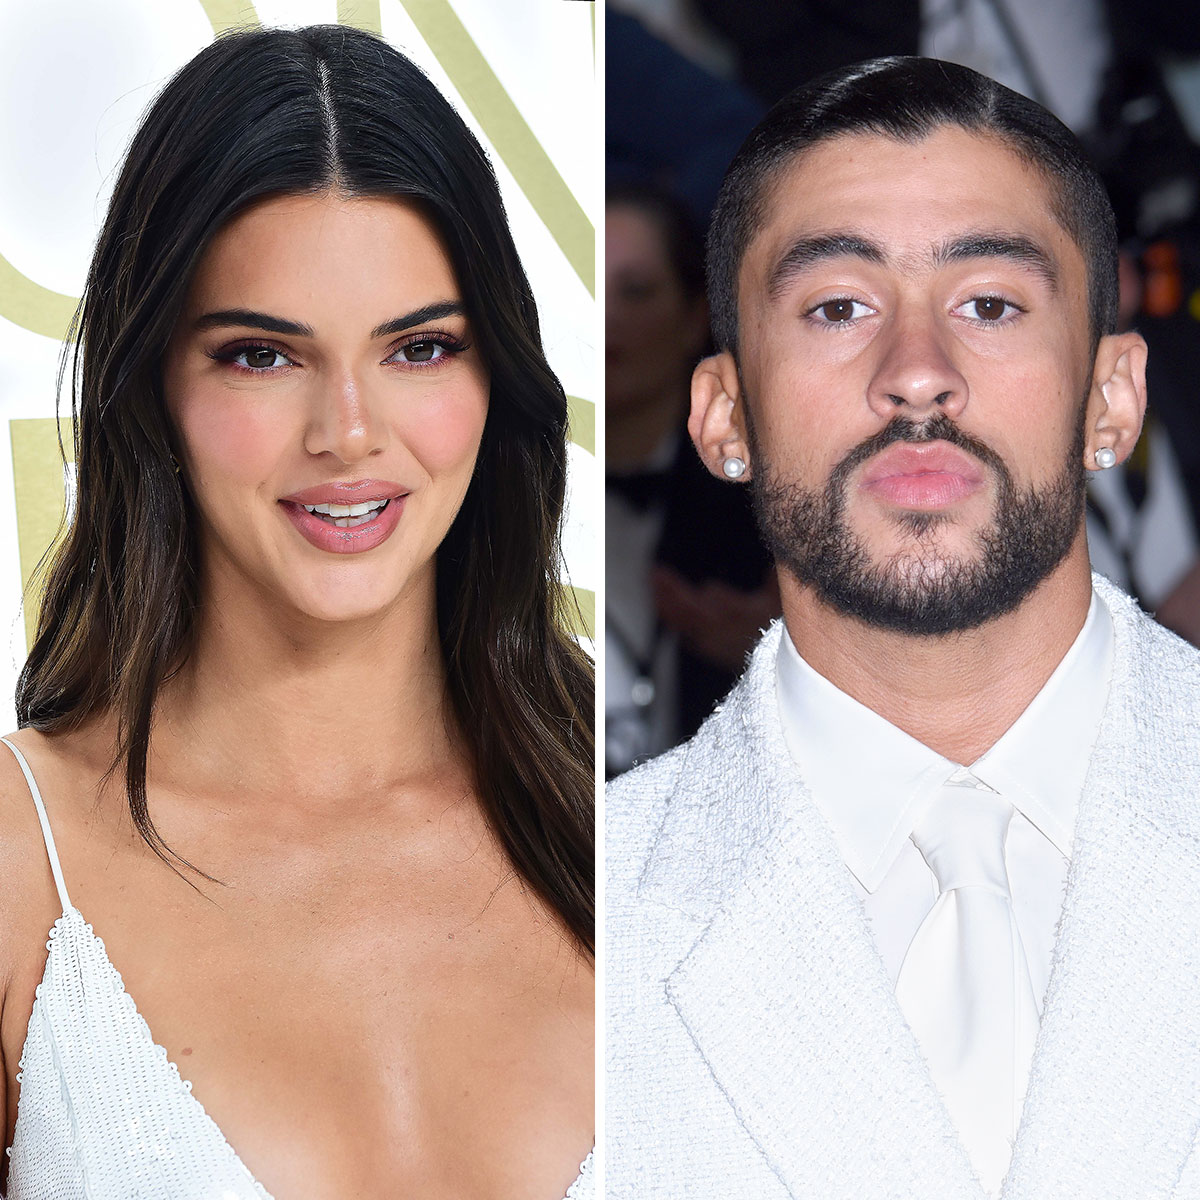 Kendall Jenner and Bad Bunny Become a Meme While Sitting Courtside